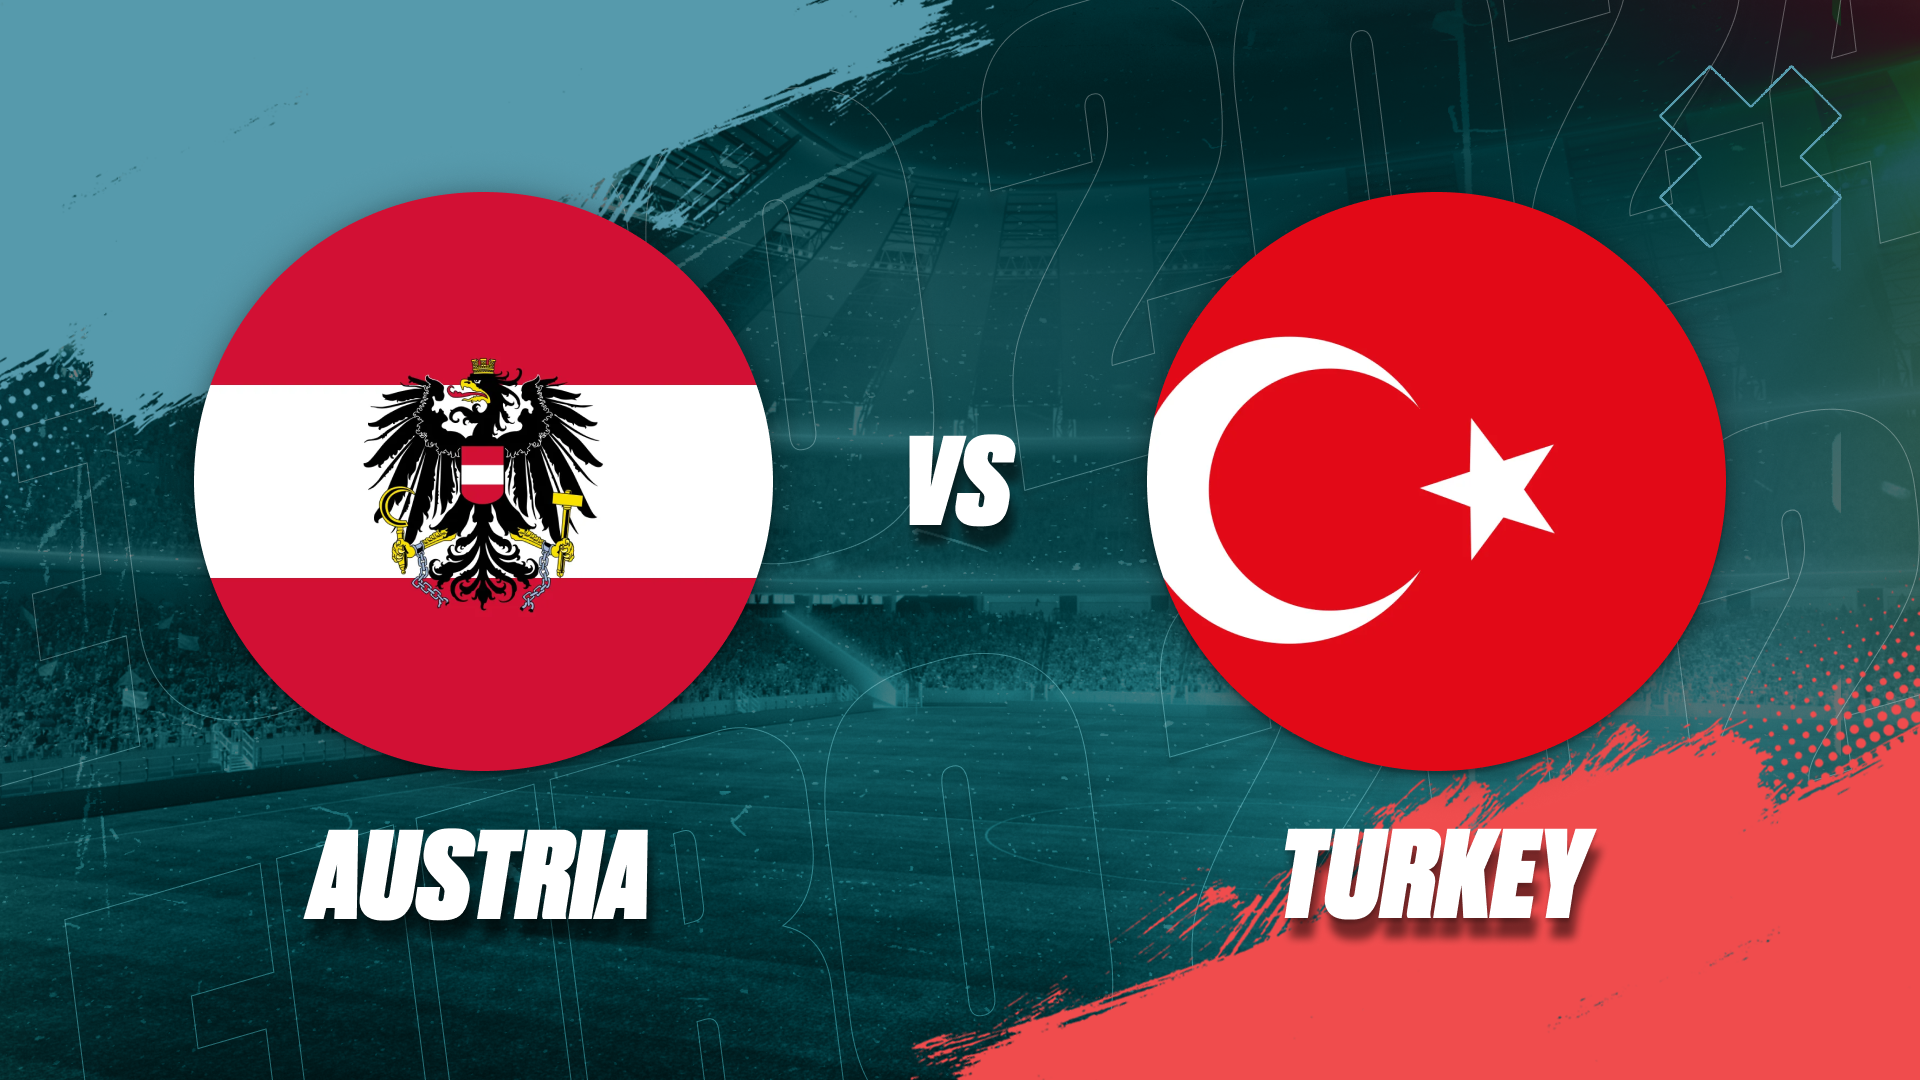 Turkey Takes Revenge On Austria In Emotional Clash Filled With Passion And Chaos